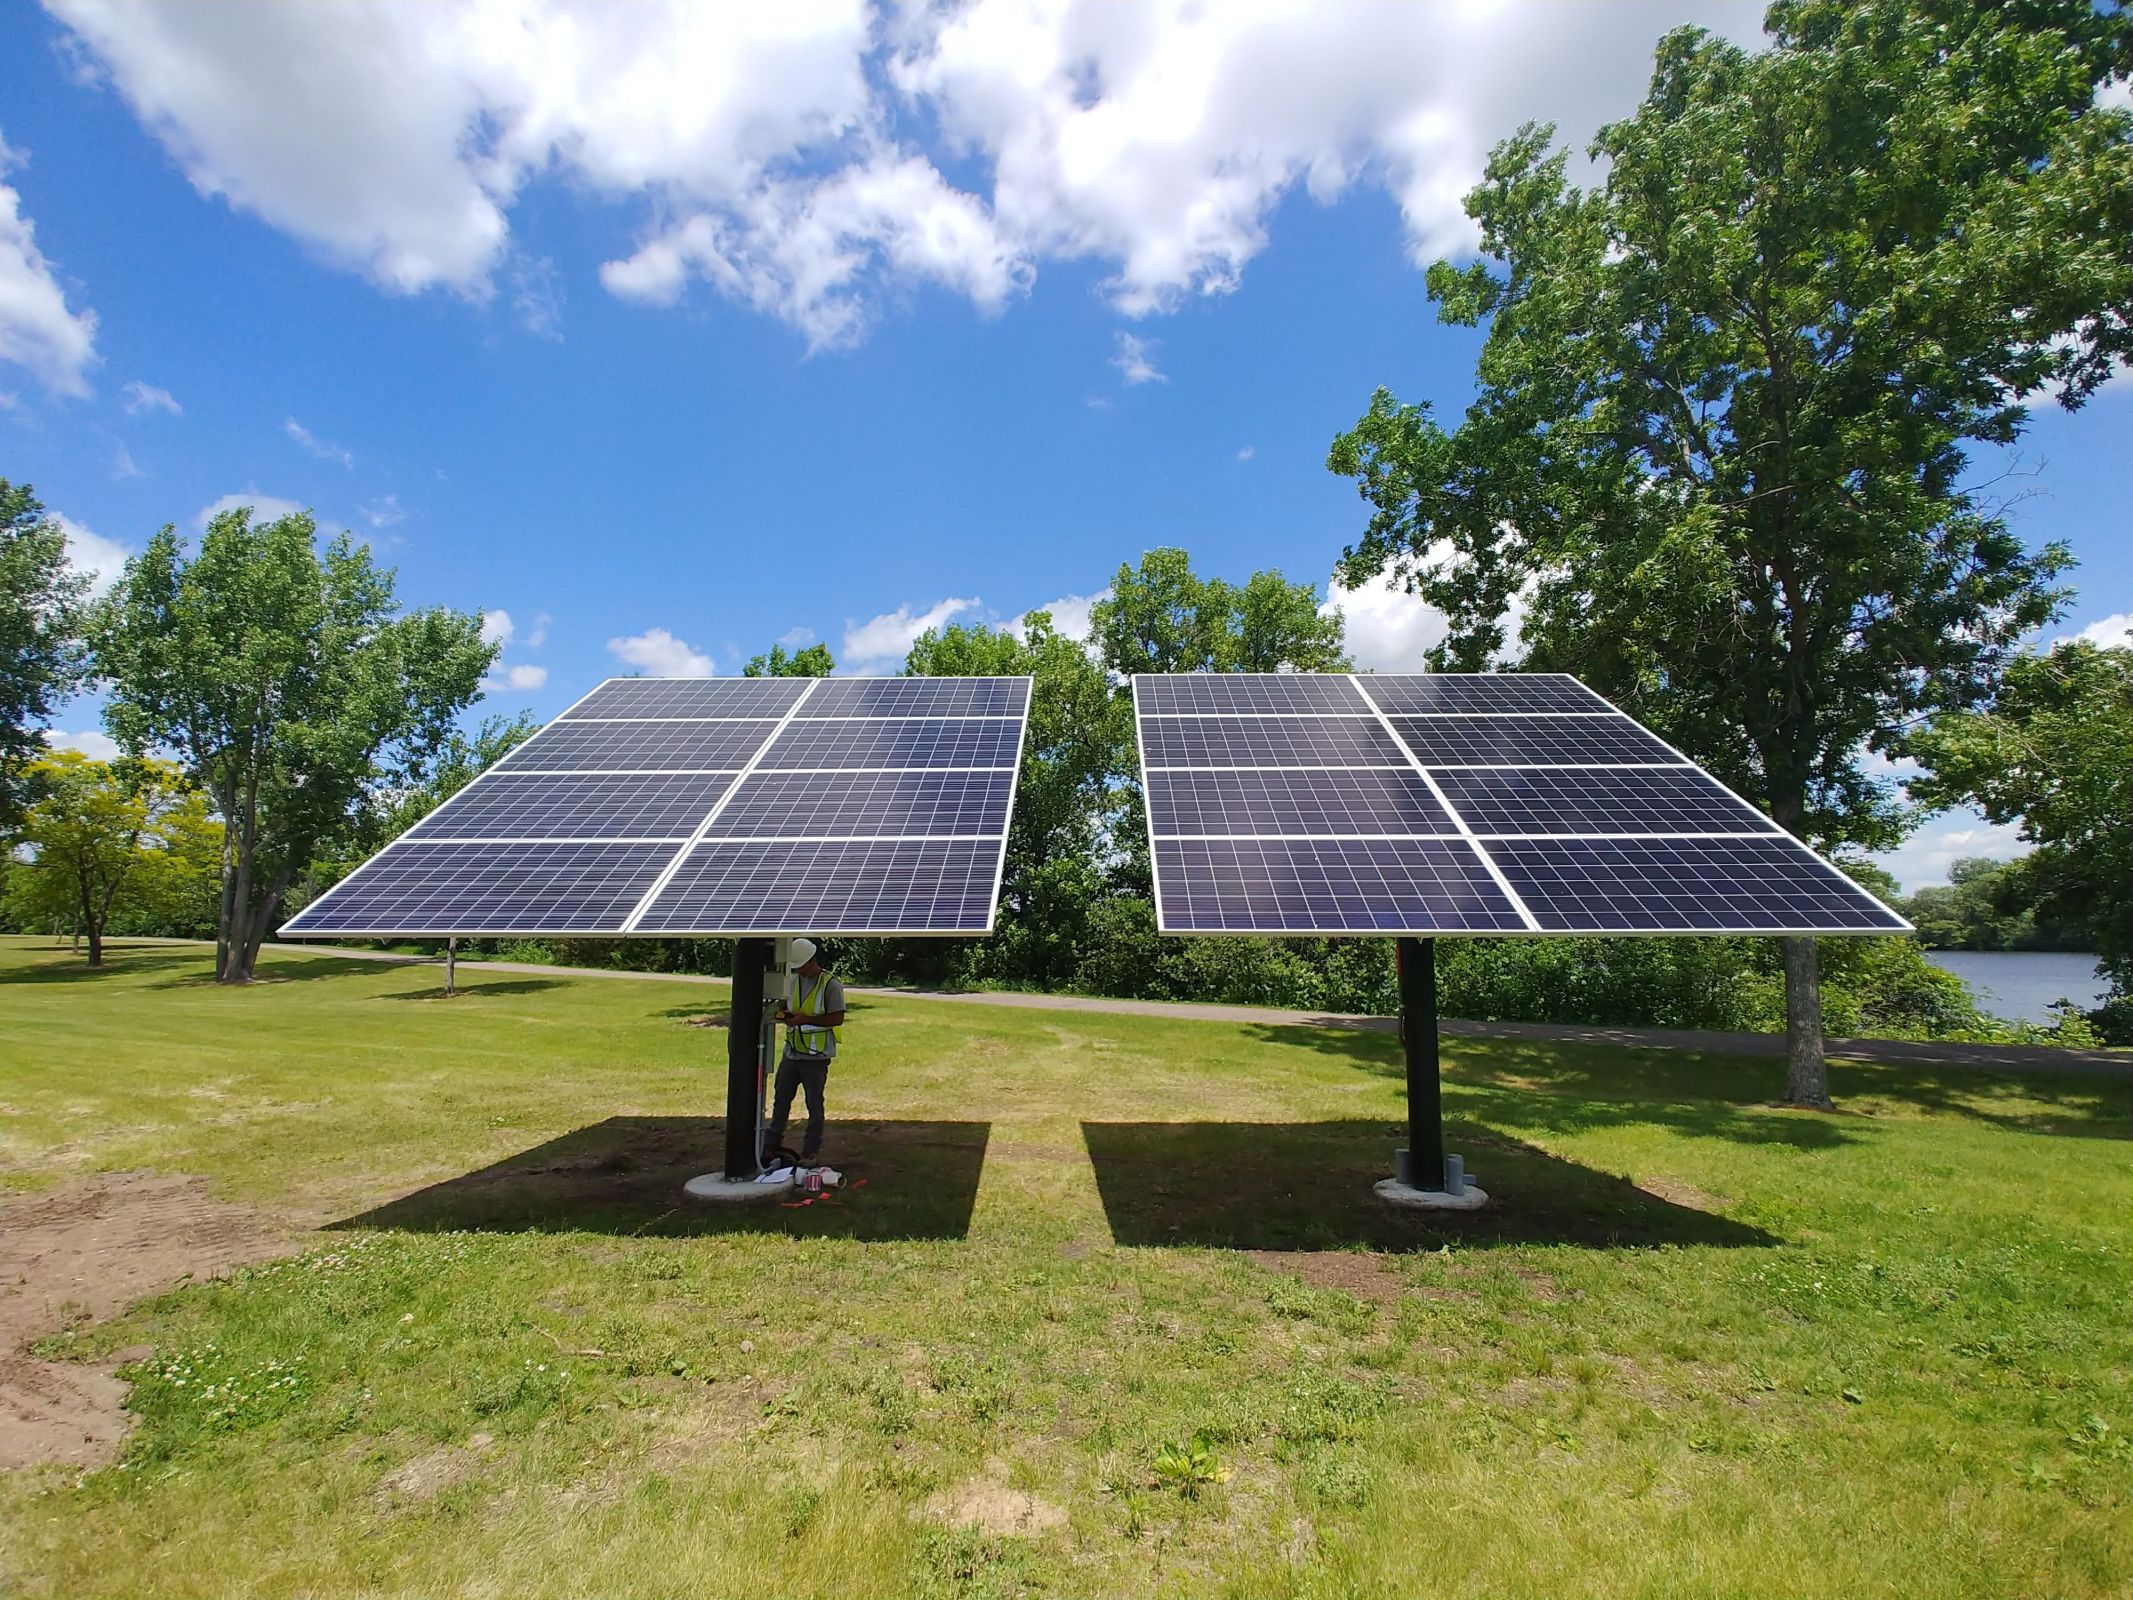 City of Elk River & Utilities: Offering Sustainable Energy choices to Local Communities Photo